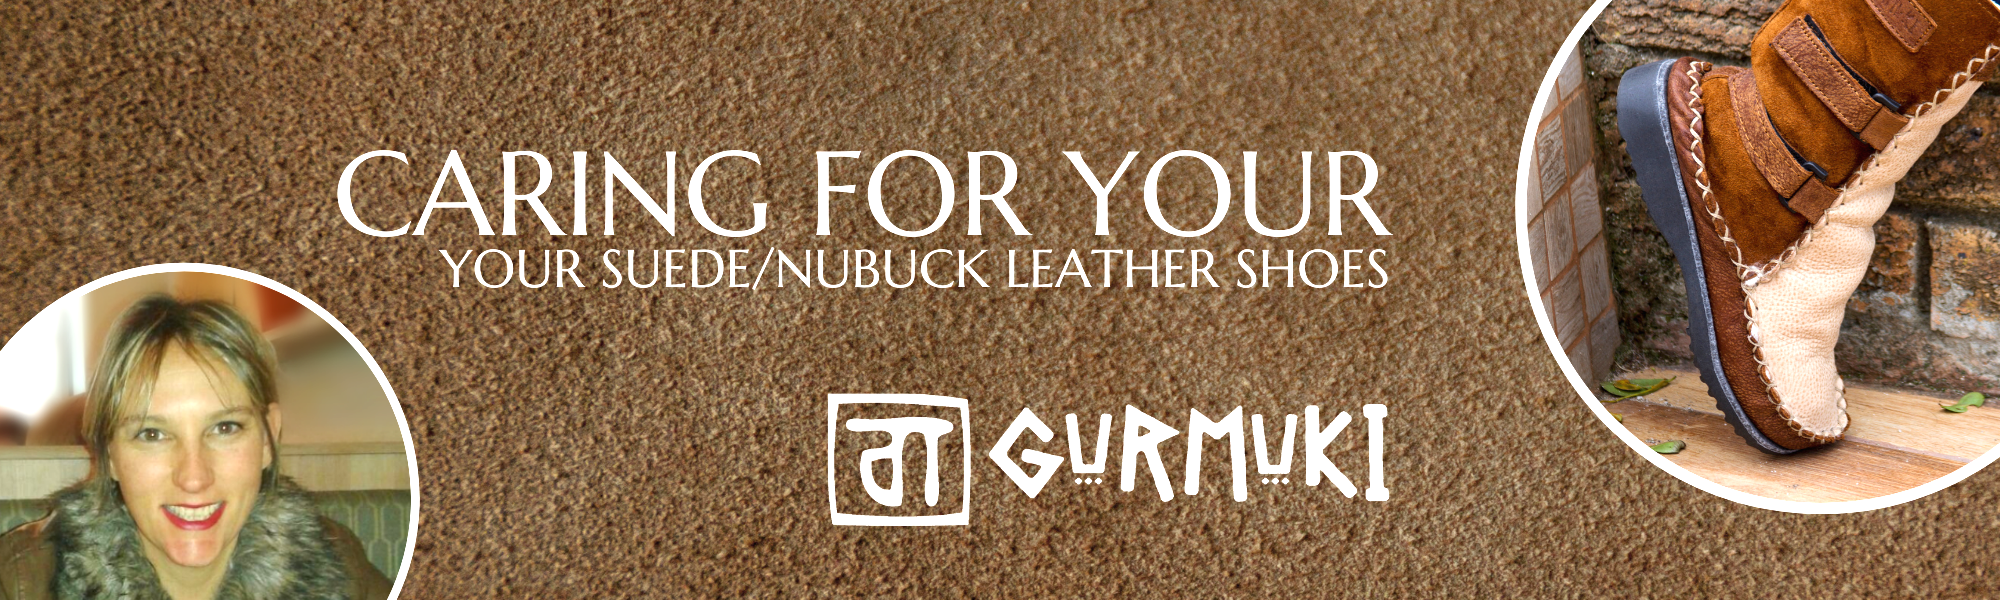 Caring for Your Gurmuki Footwear Shoes Brand